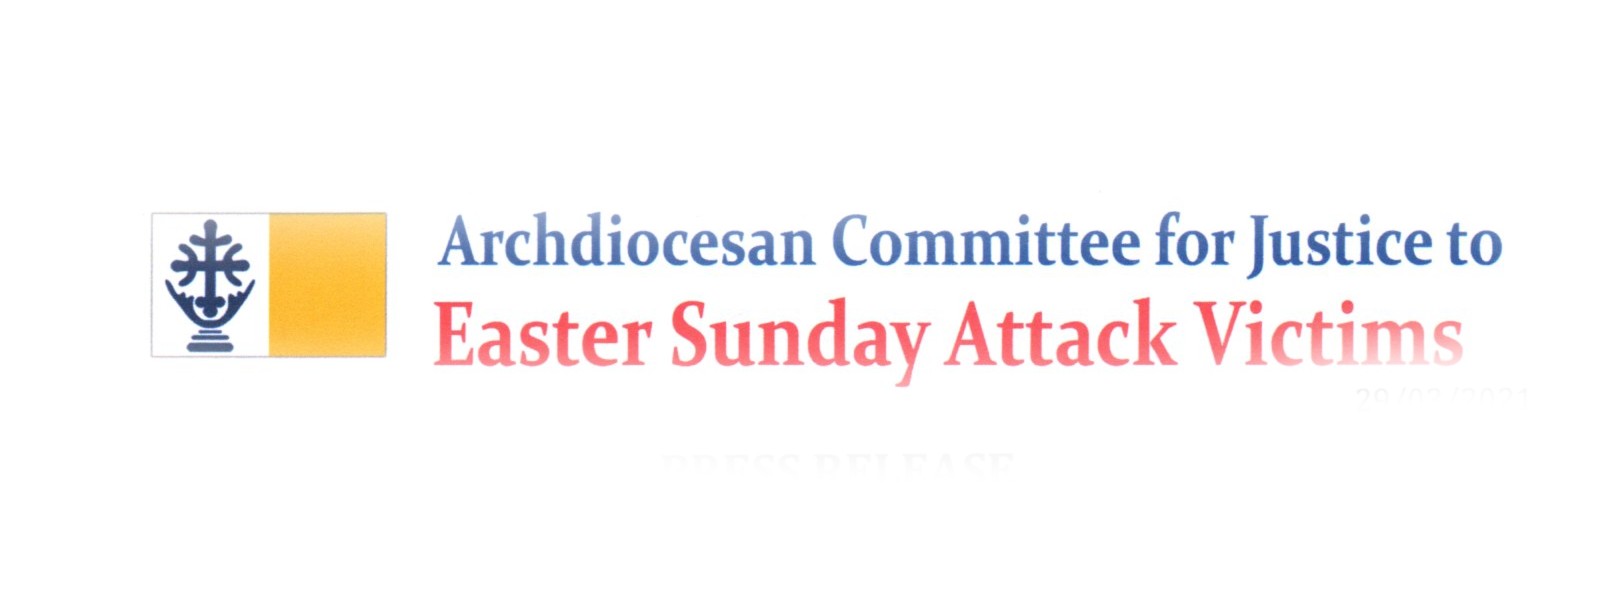 ‘External interferences hampering 2019 attack probe?’ – Archdiocesan Committee